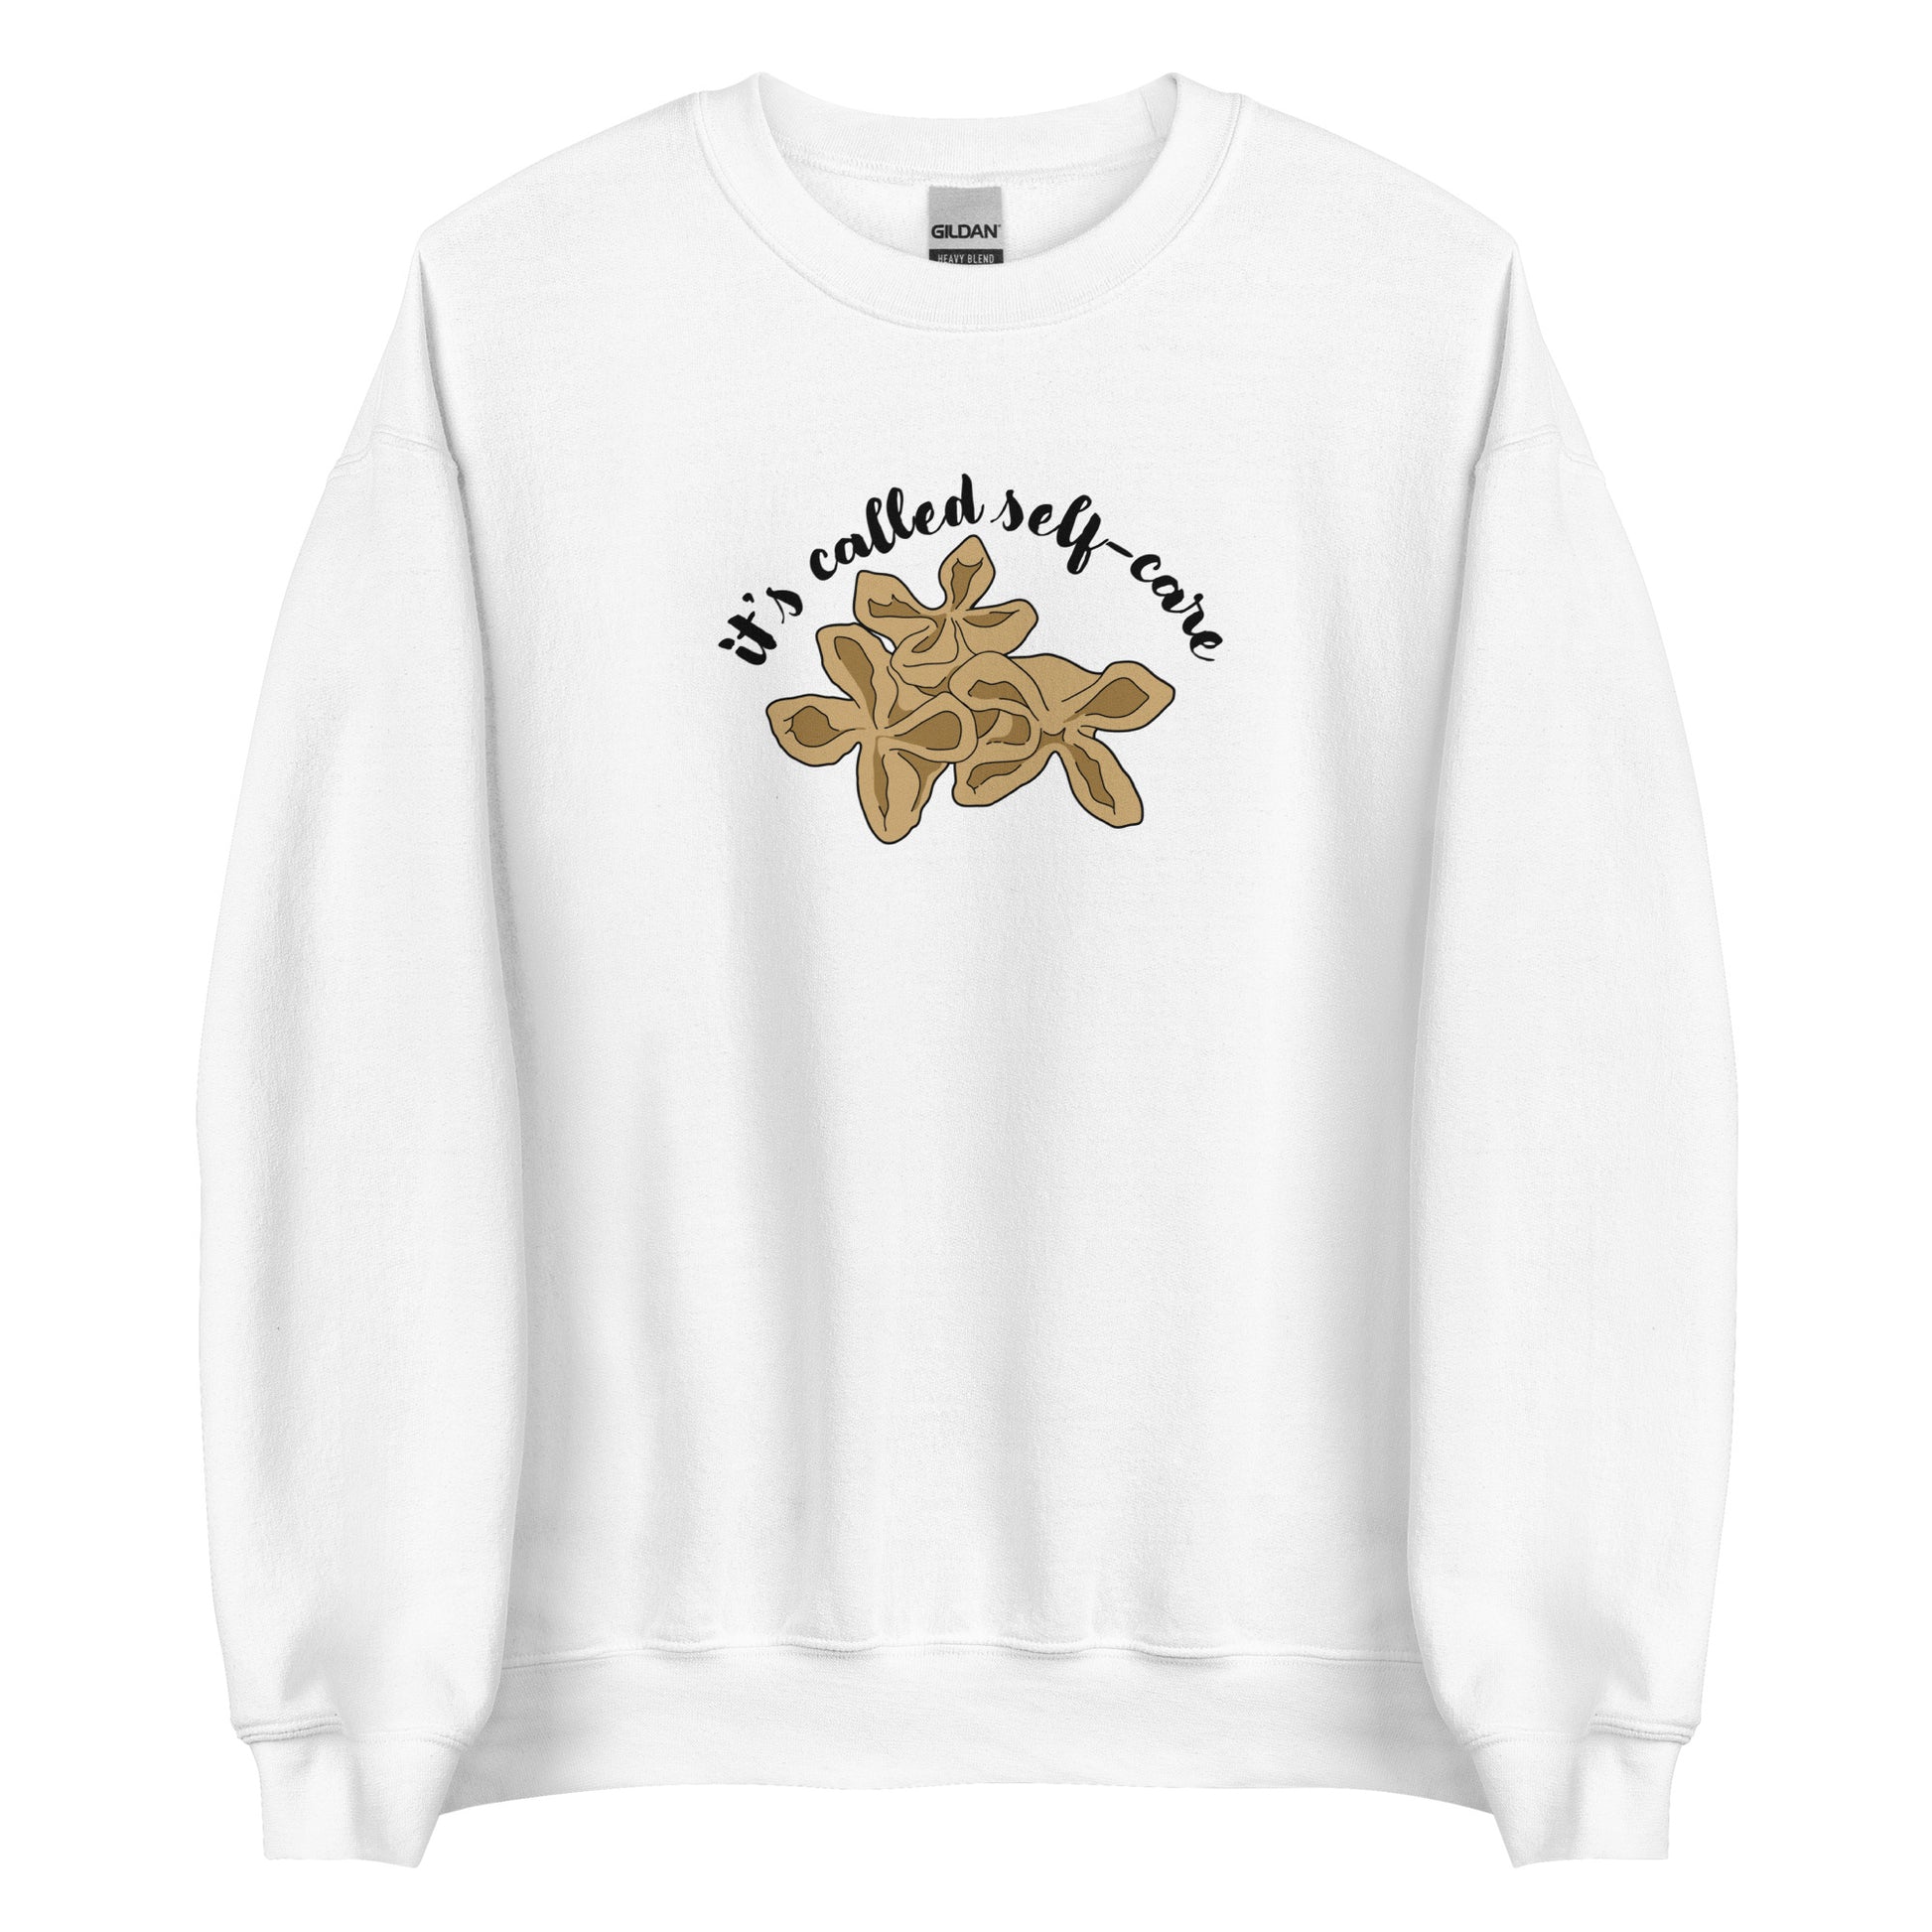 A white crewneck sweatshirt featuring an illustration of three pieces of crab rangoon. Text in an arc above the crab rangoon reads "it's called self-care" in a cursive script.